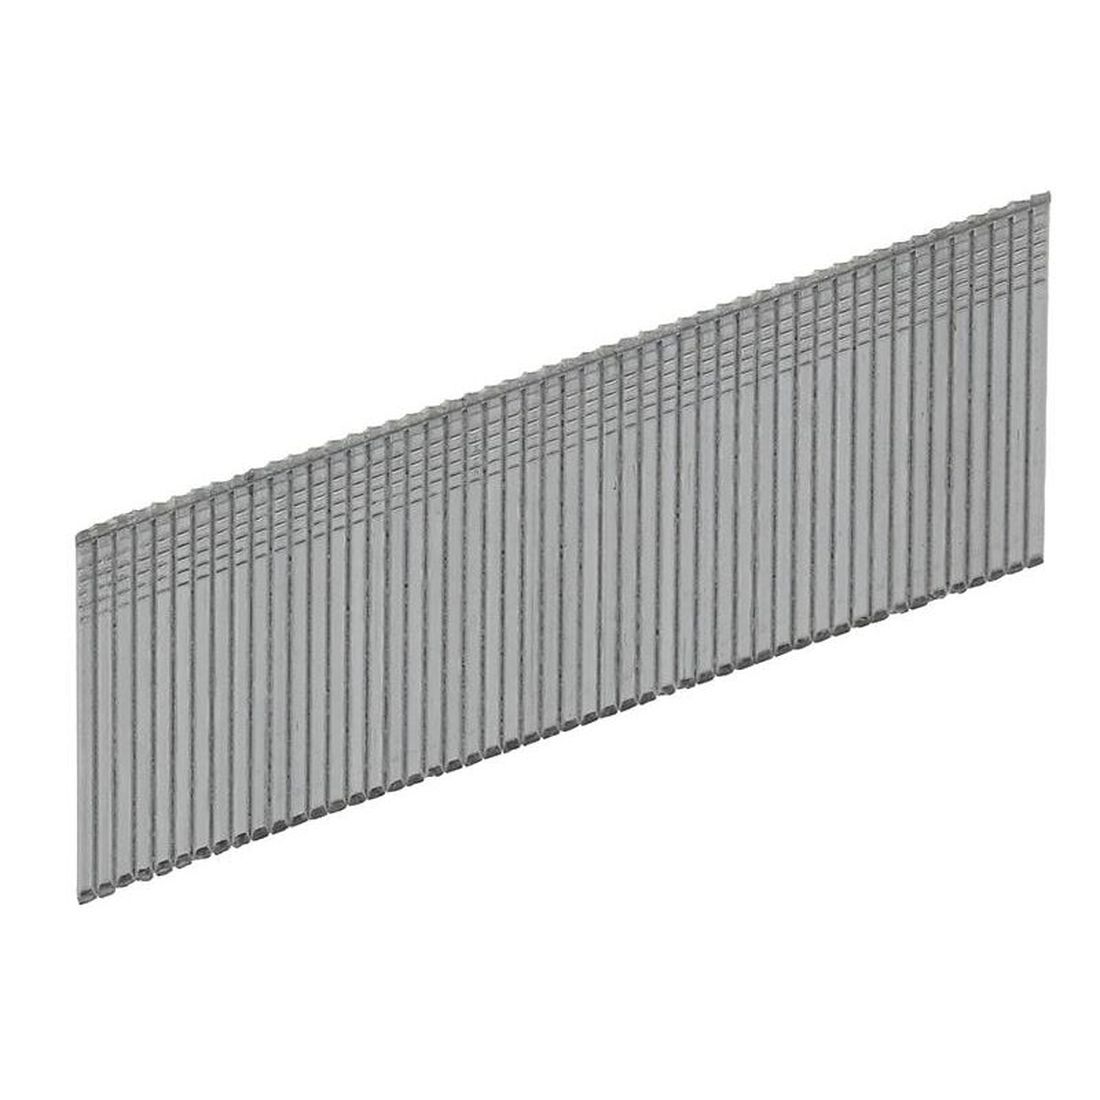 Paslode 38mm IM65a Galvanised Angled Brads Box of 2000 + 2 Fuel Cells                   